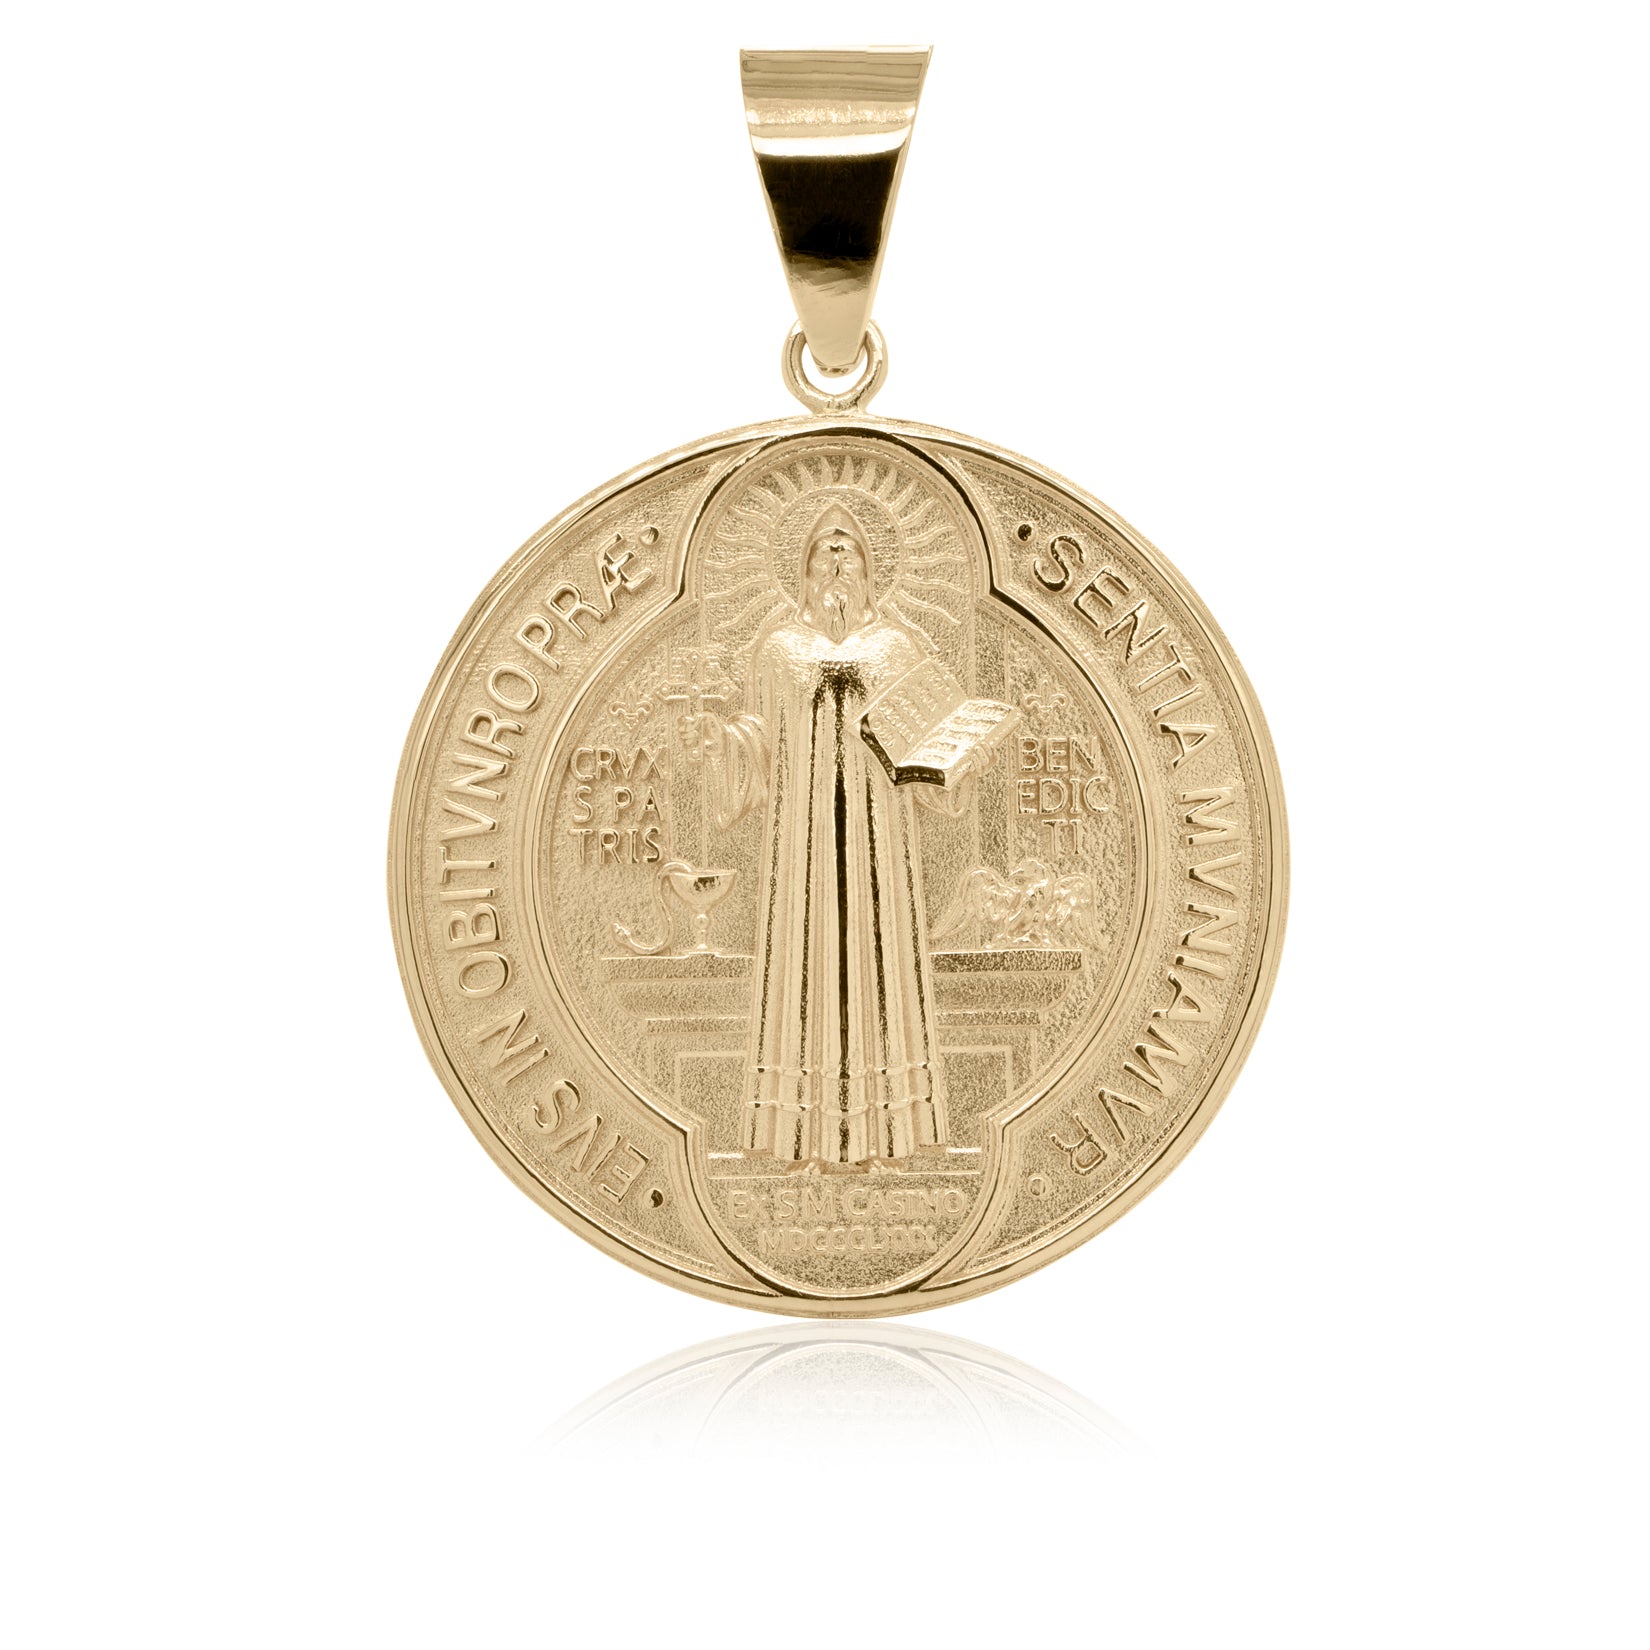 Gold round pendant with a St. benedict engraved on a white background